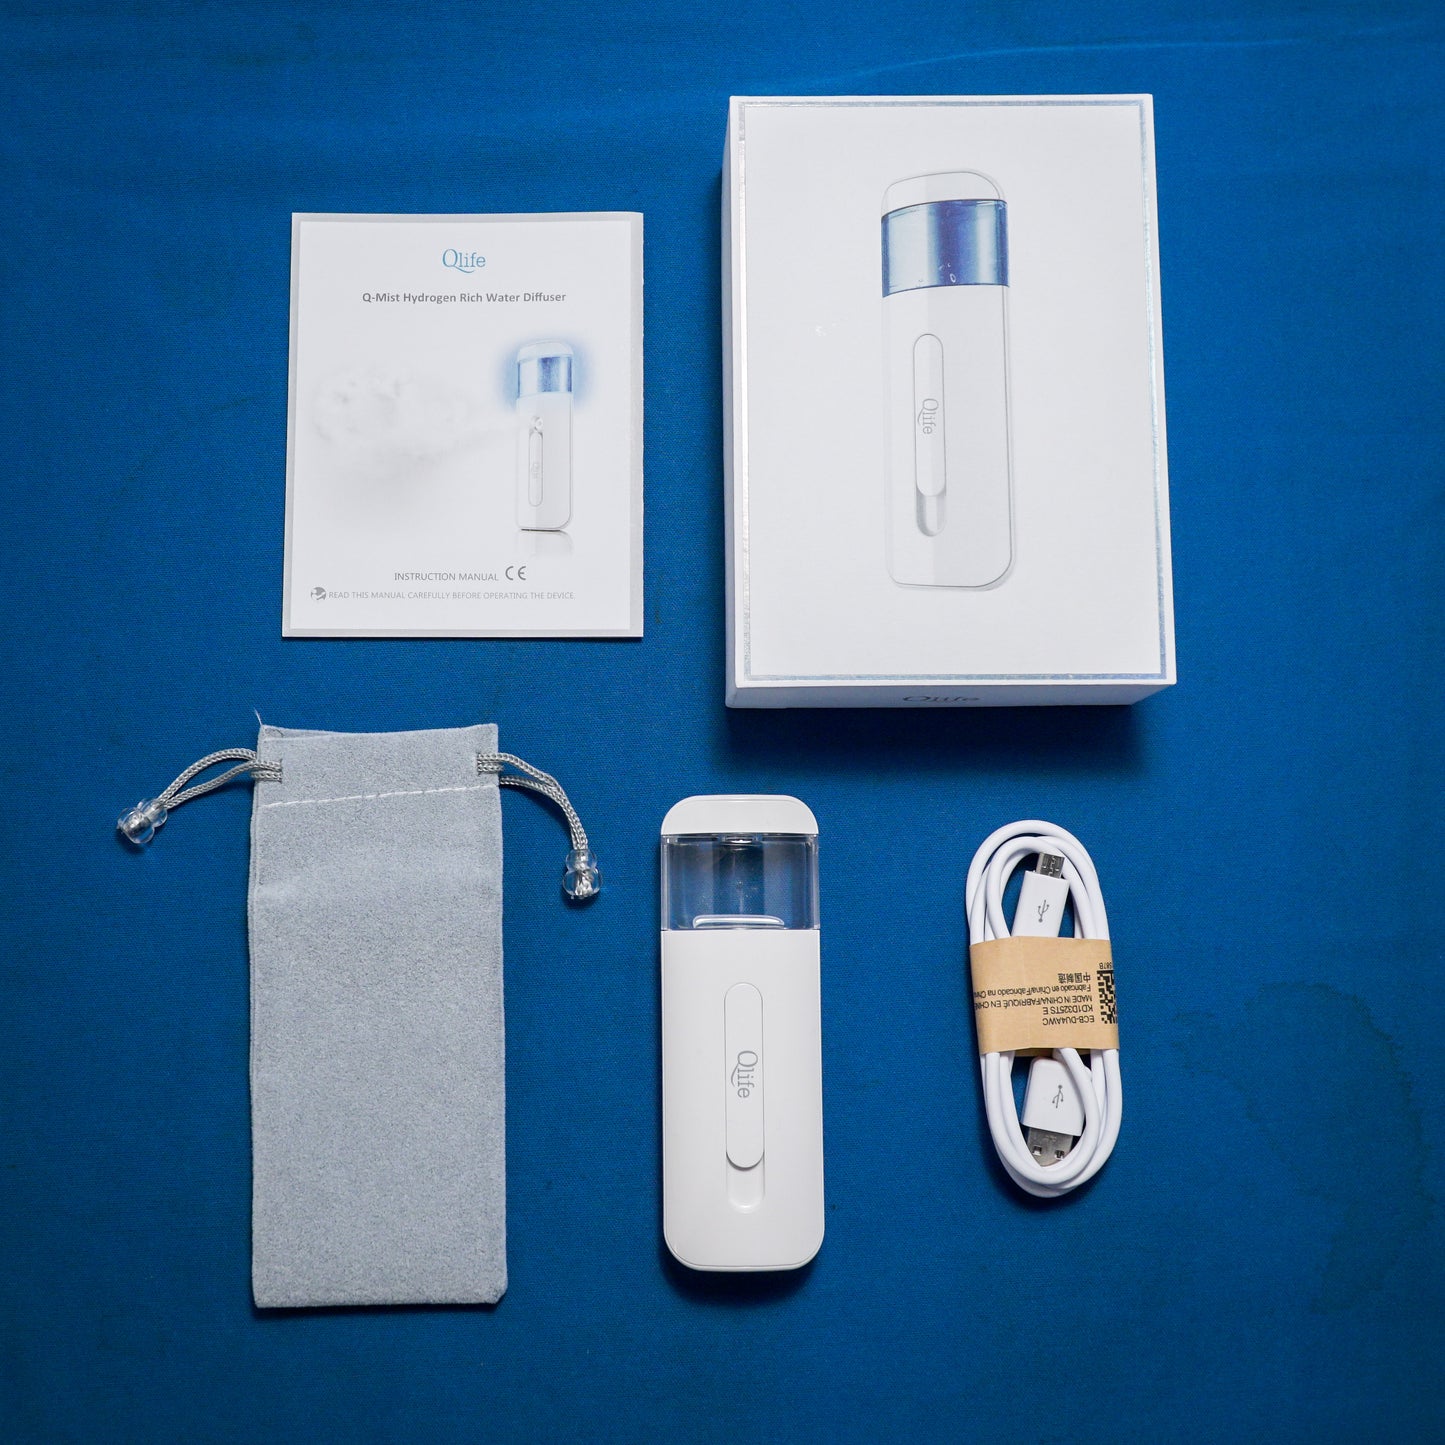 ELW-QMIST WHITE BUNDLE-50 (2 boxes of 50 ppm water and 1 x Q-Mist Hydrogen Water Diffuser White)-Save $40. The price includes S&H